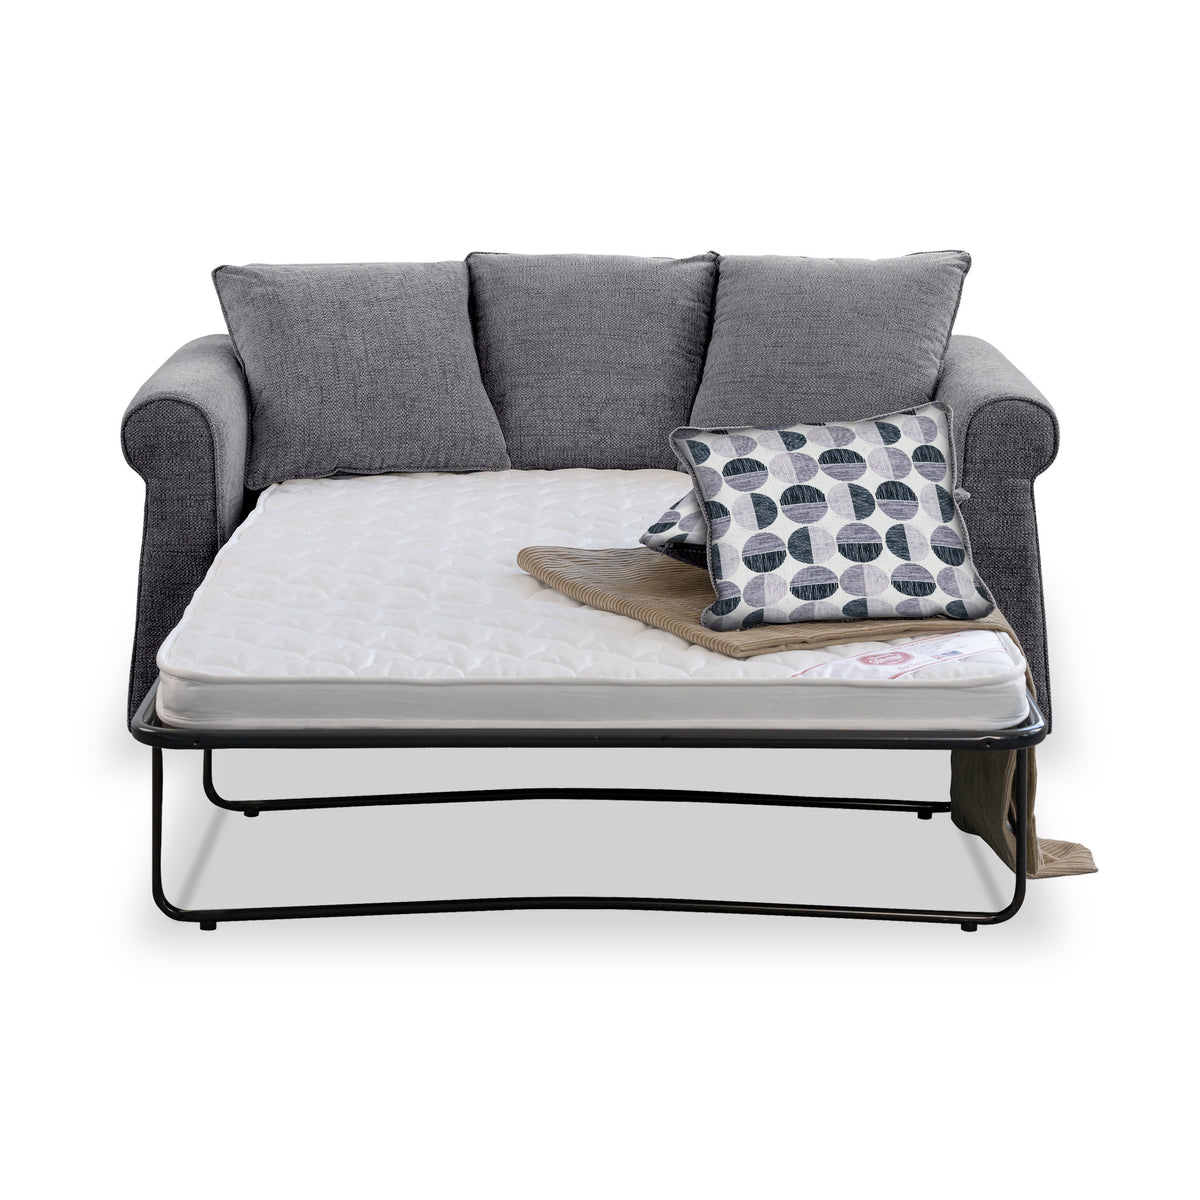 Branston Charcoal Soft Weave 2 Seater Sofabed with Mono Scatter Cushions from Roseland Furniture